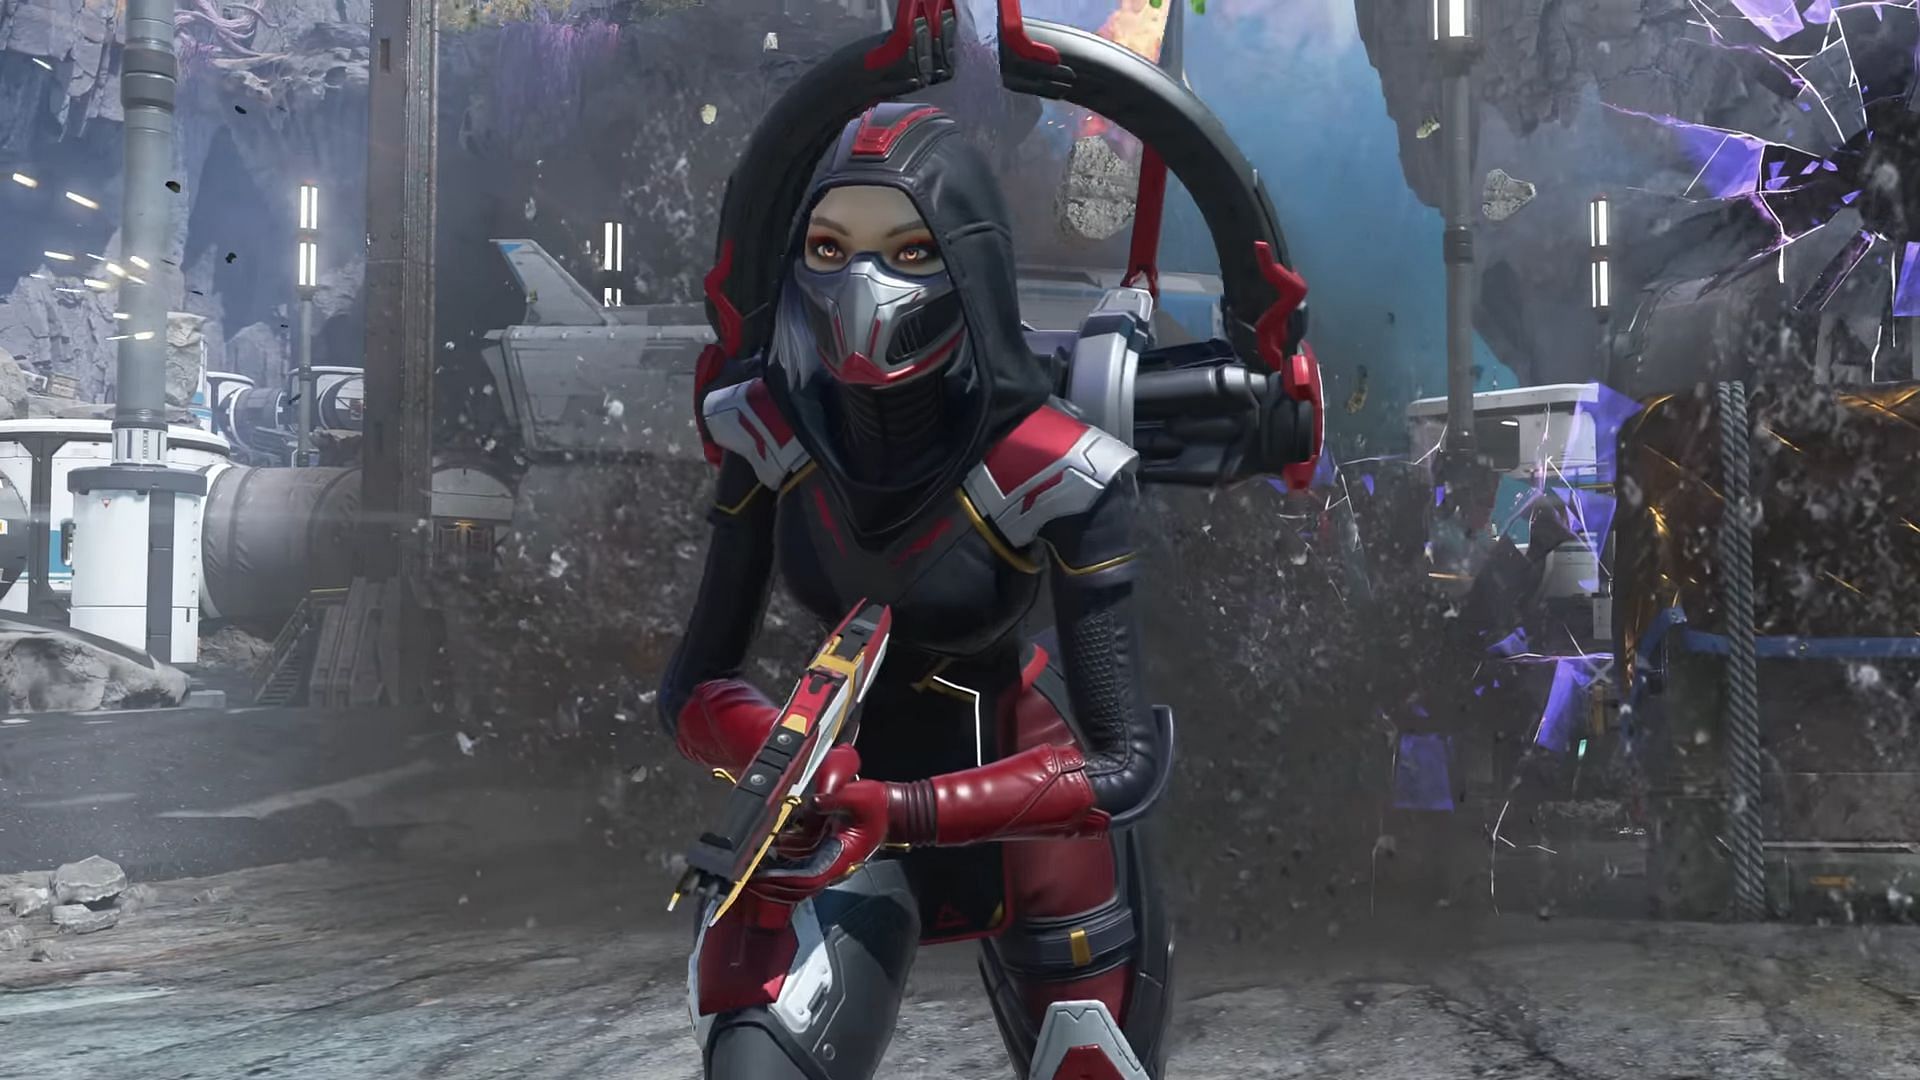 The best secondary weapons in Apex Legends, best secondary weapons in Apex Legends